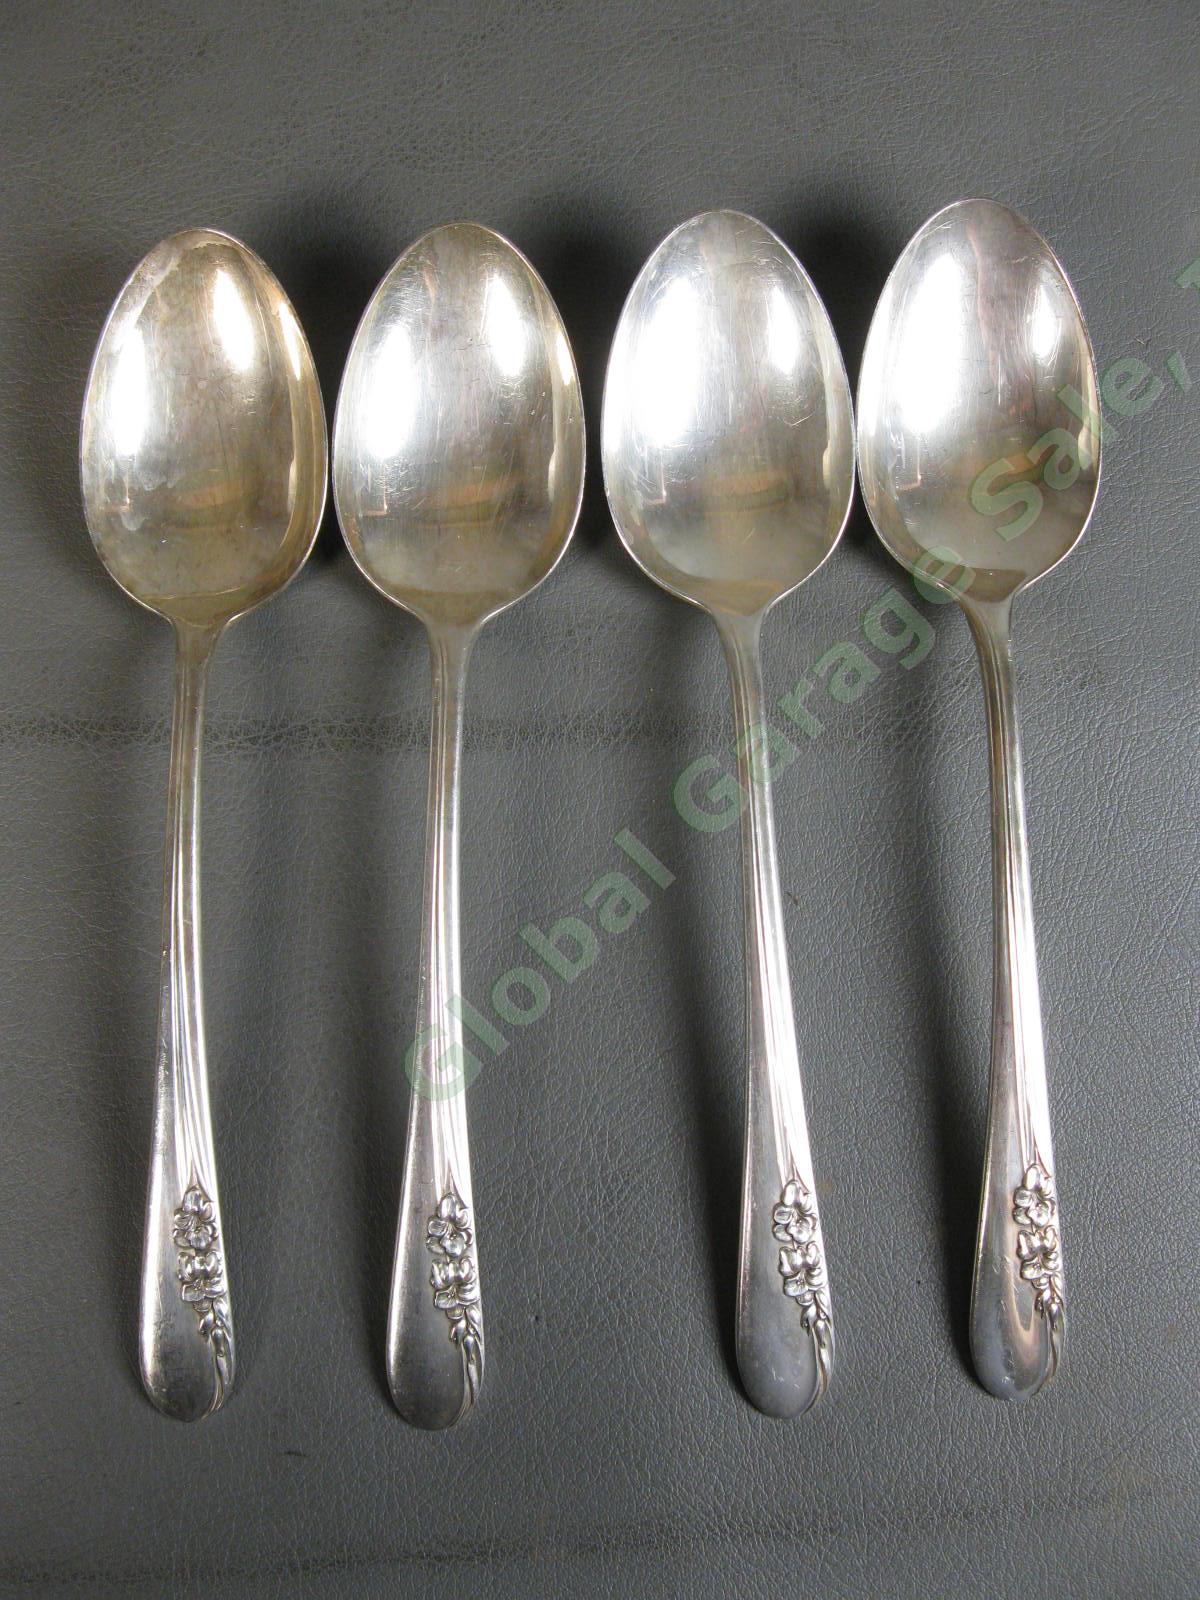 4 International Sterling Silver Blossom Time Tablespoons Serving Spoon Set 252g